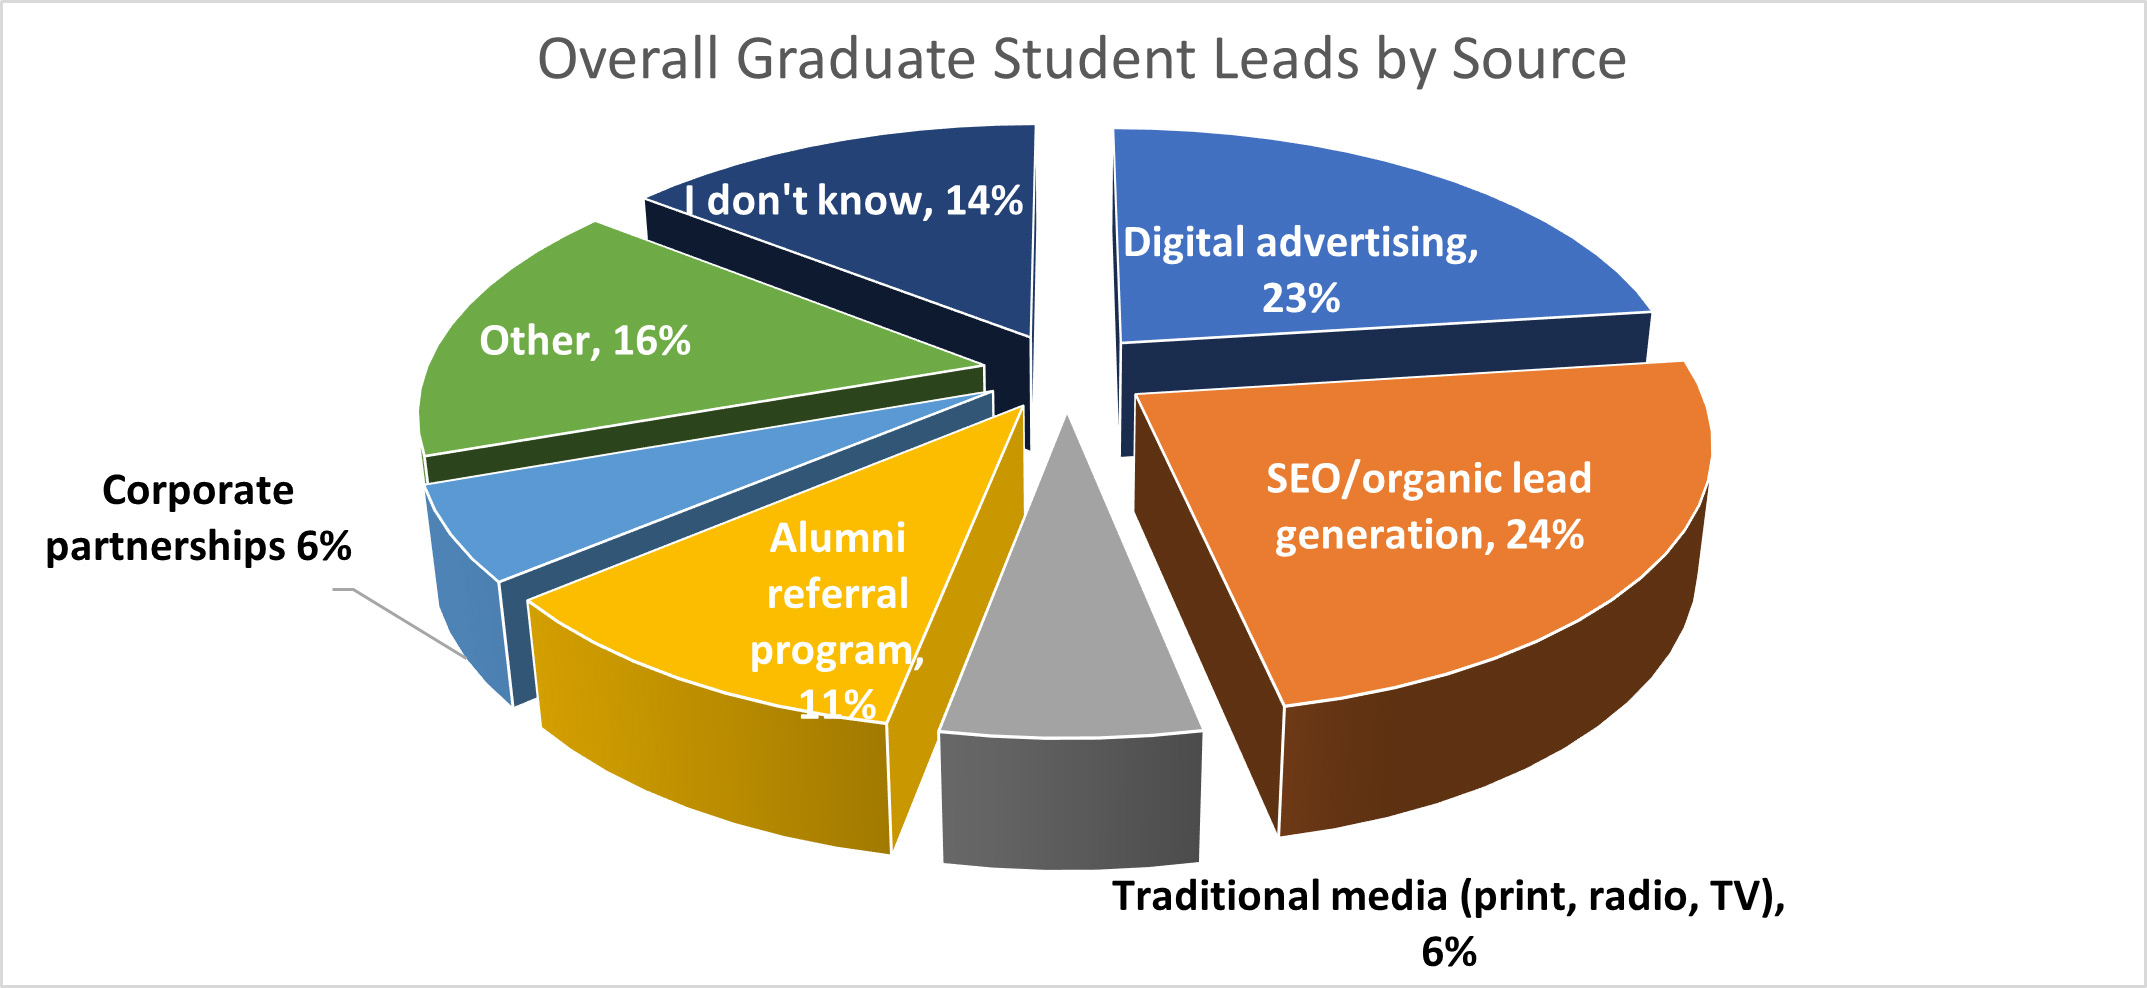 Overall Graduate Student Leads by Source